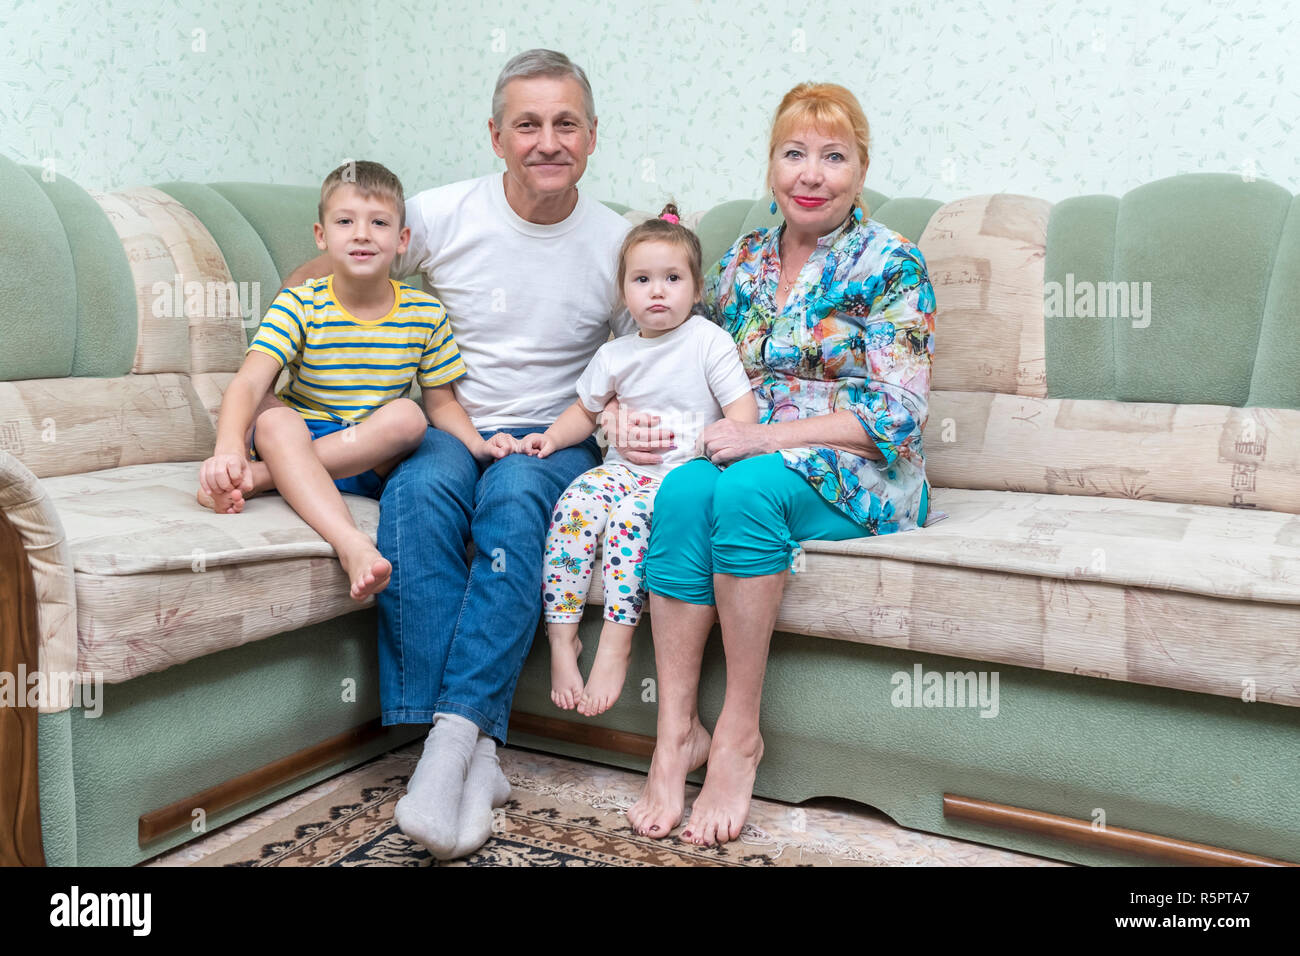 portrait of grandmothers and grandfathers with grandchildren sitting on the couch Stock Photo